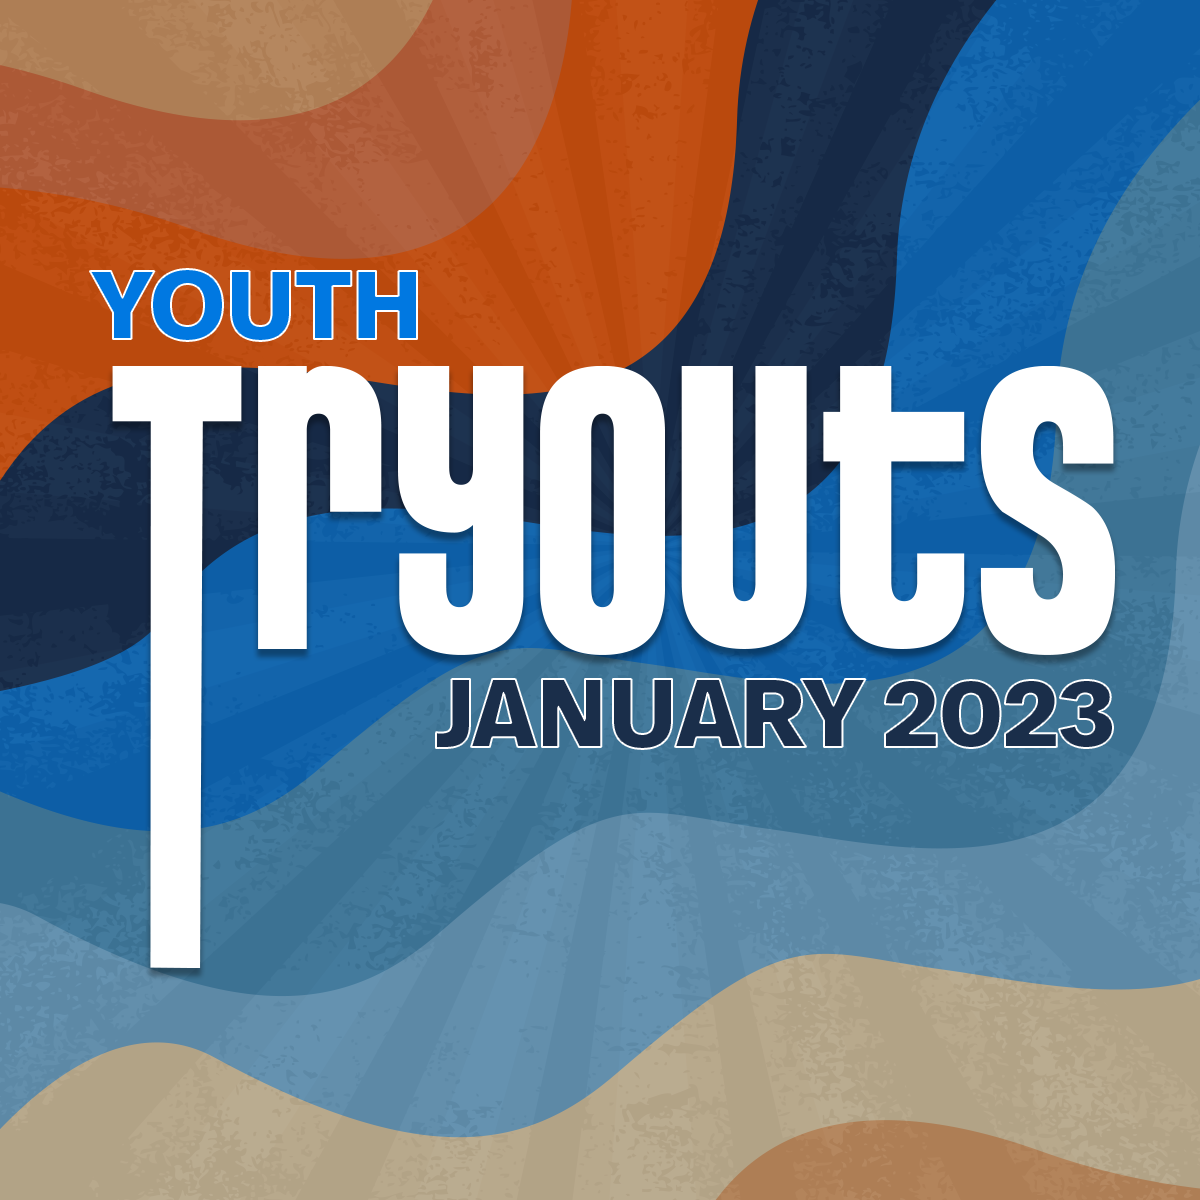 Youth Tryouts January 2023